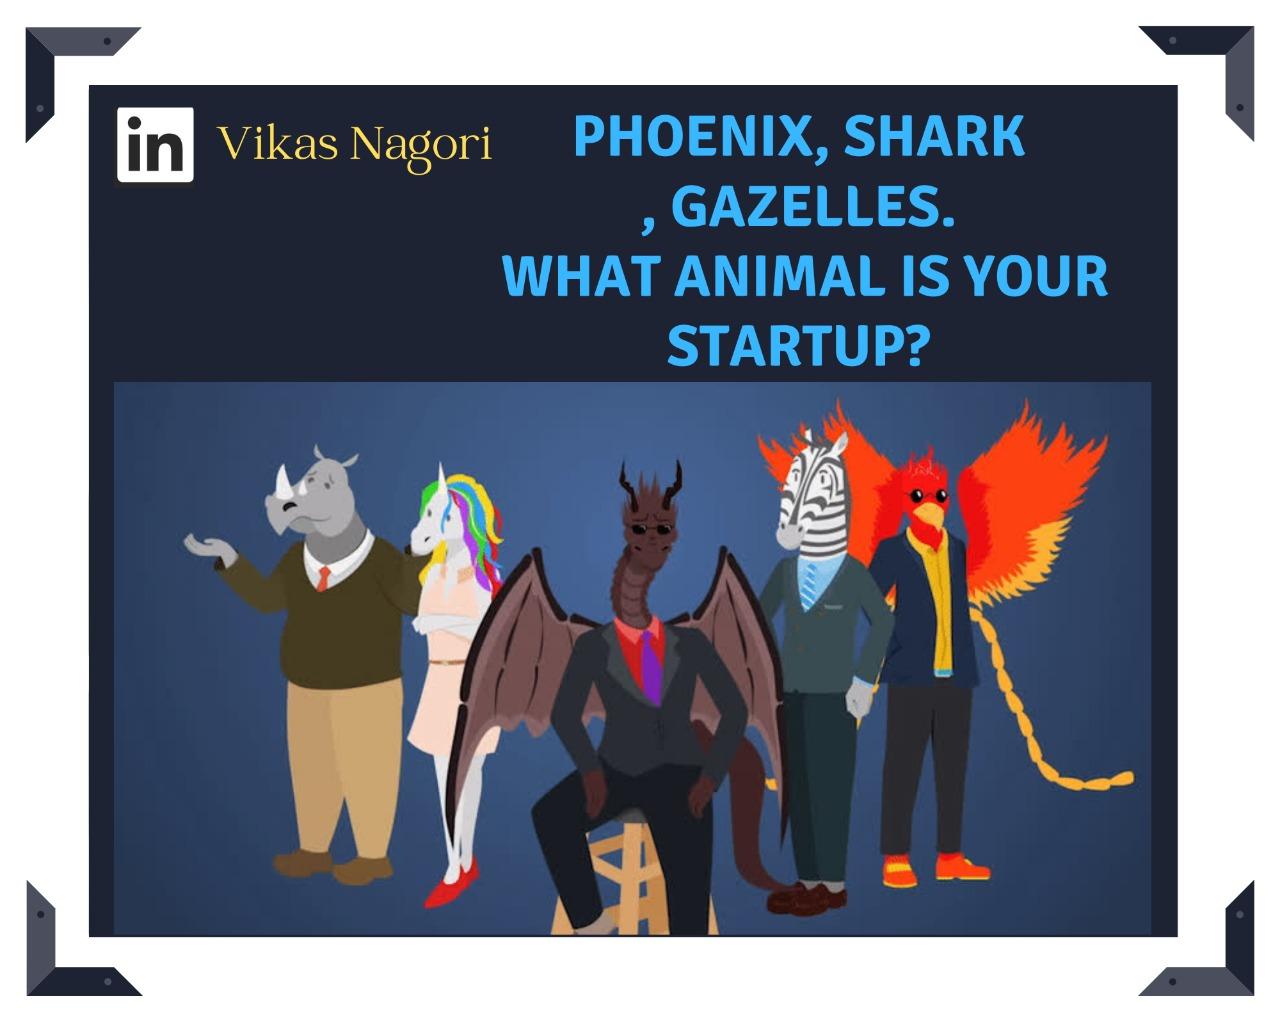 What animal is your Startup?